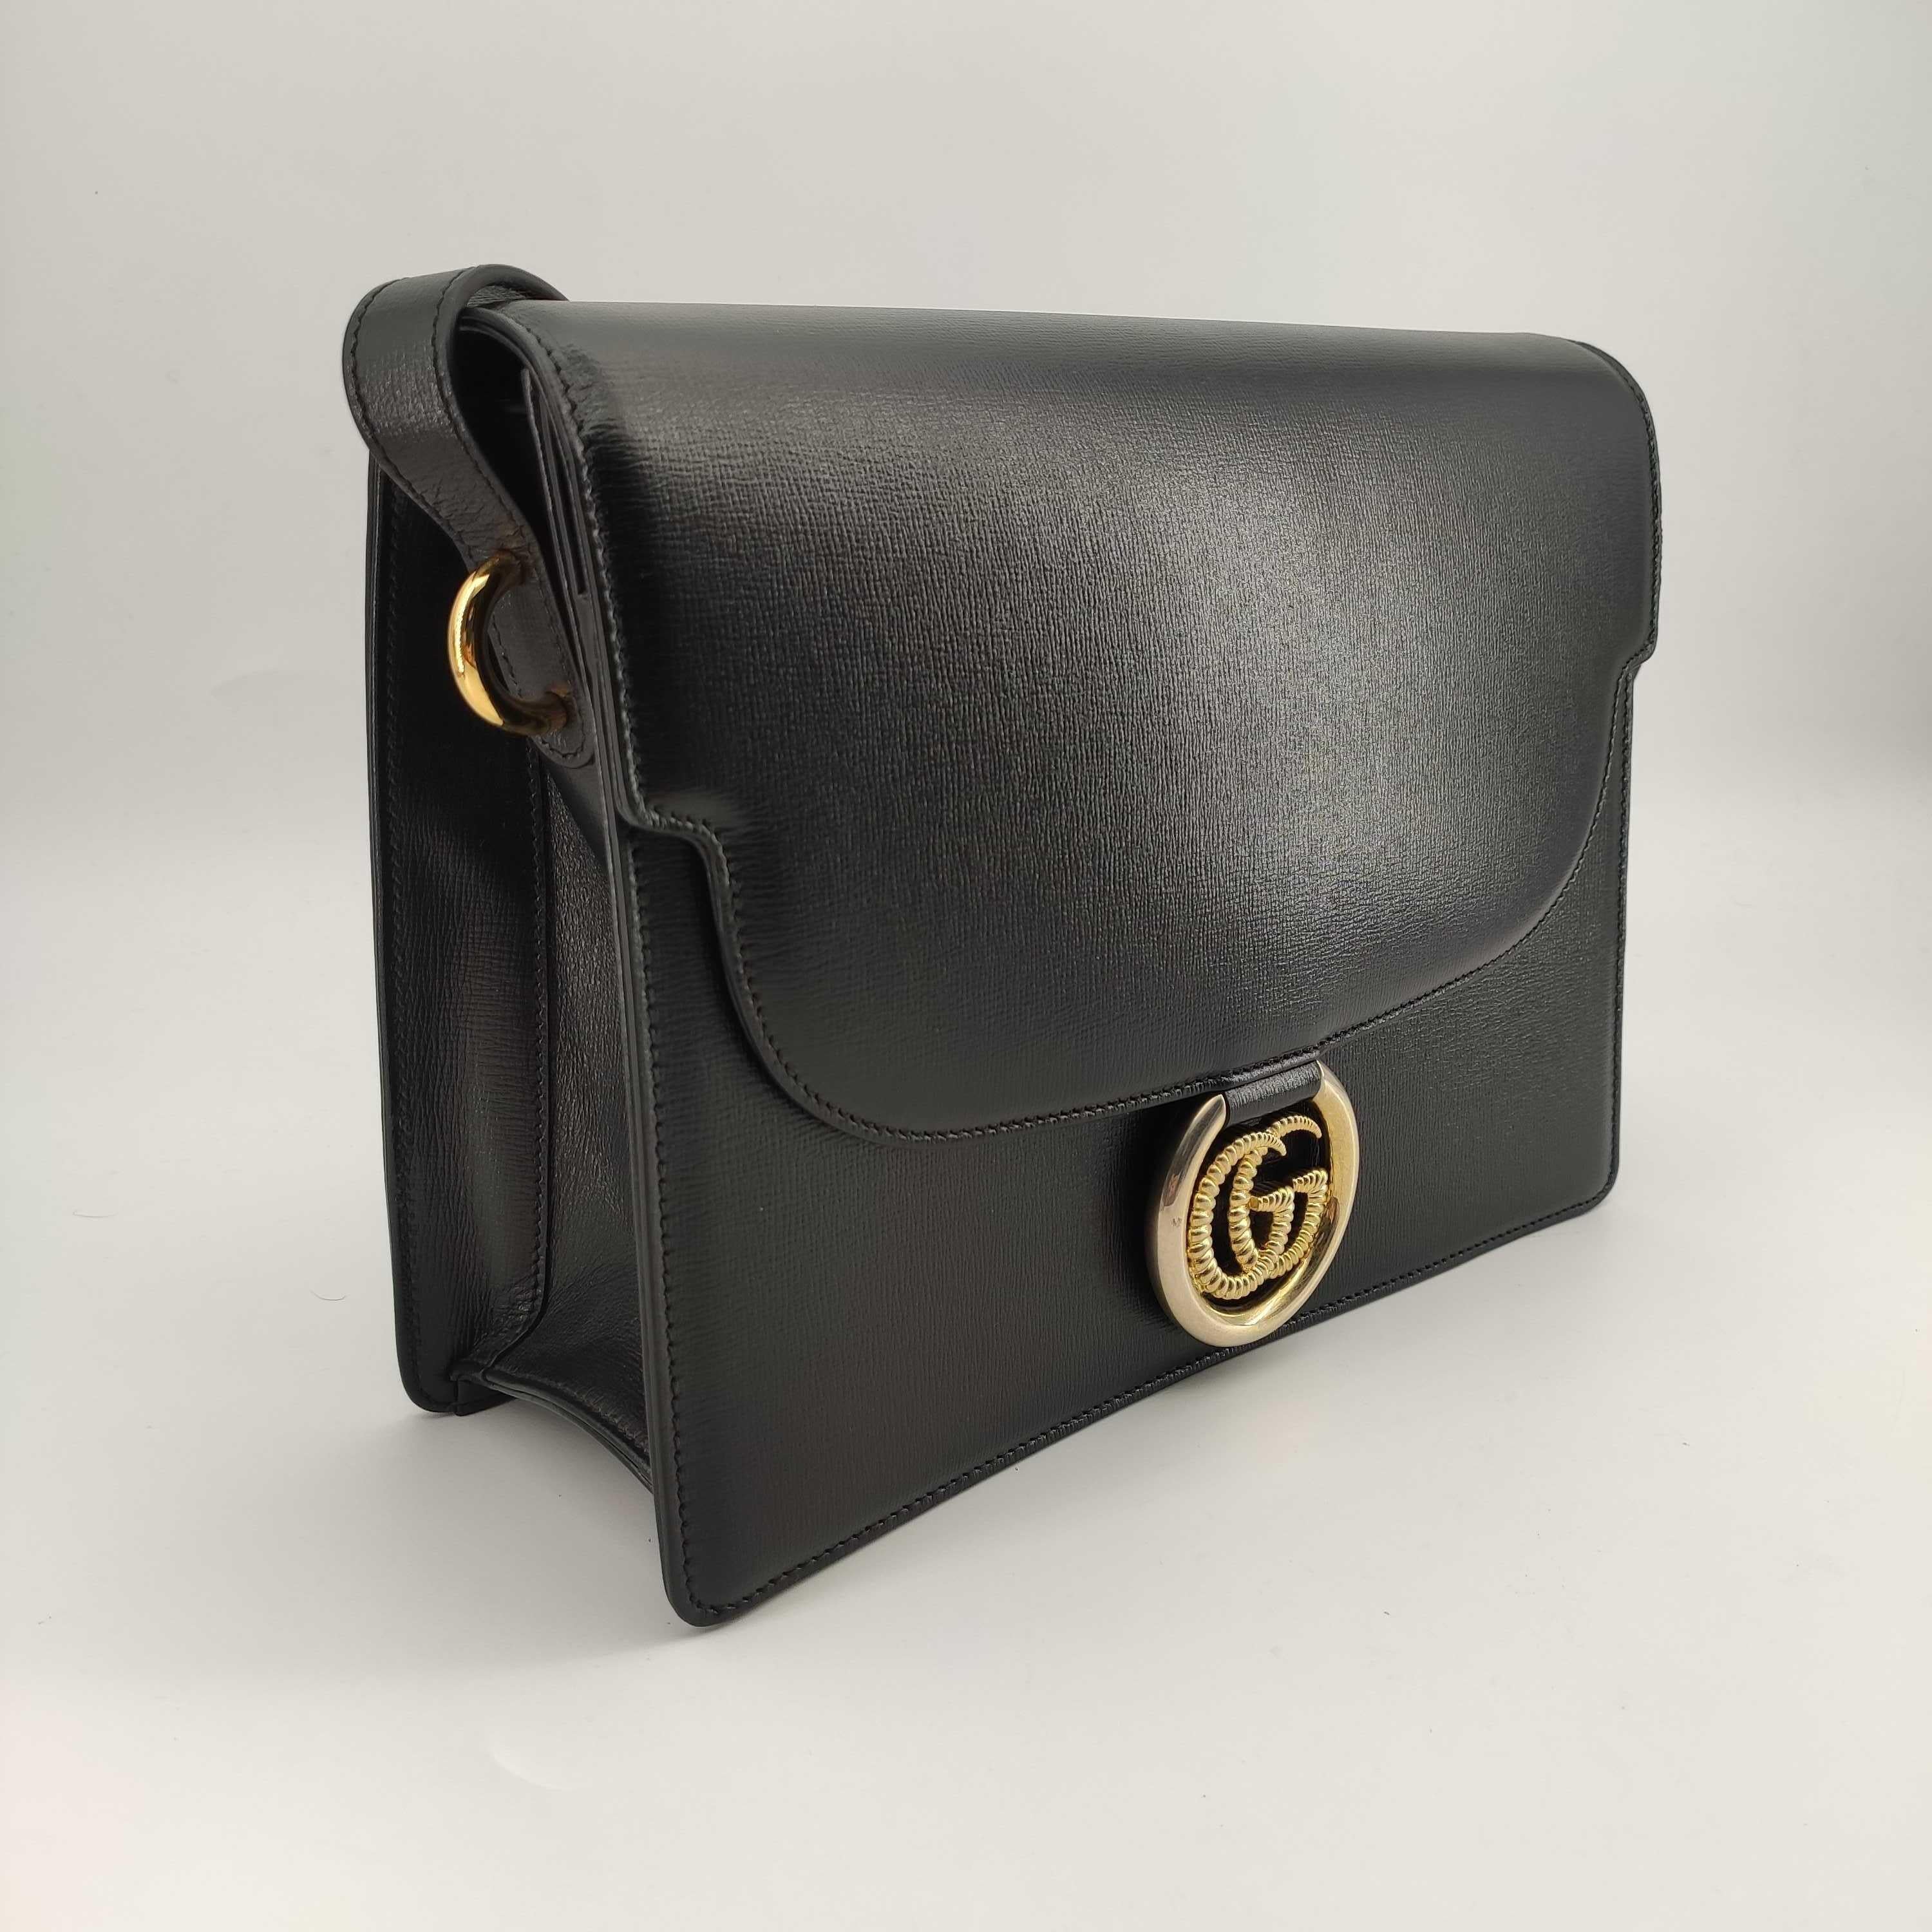 - Designer: GUCCI
- Model: Ring
- Condition: Very good condition. Scratches on the clasp
- Accessories: Dustbag
- Measurements: Width: 30cm, Height: 21cm, Depth: 8.5cm, Strap: 110cm
- Exterior Material: Leather
- Exterior Color: Black
- Interior